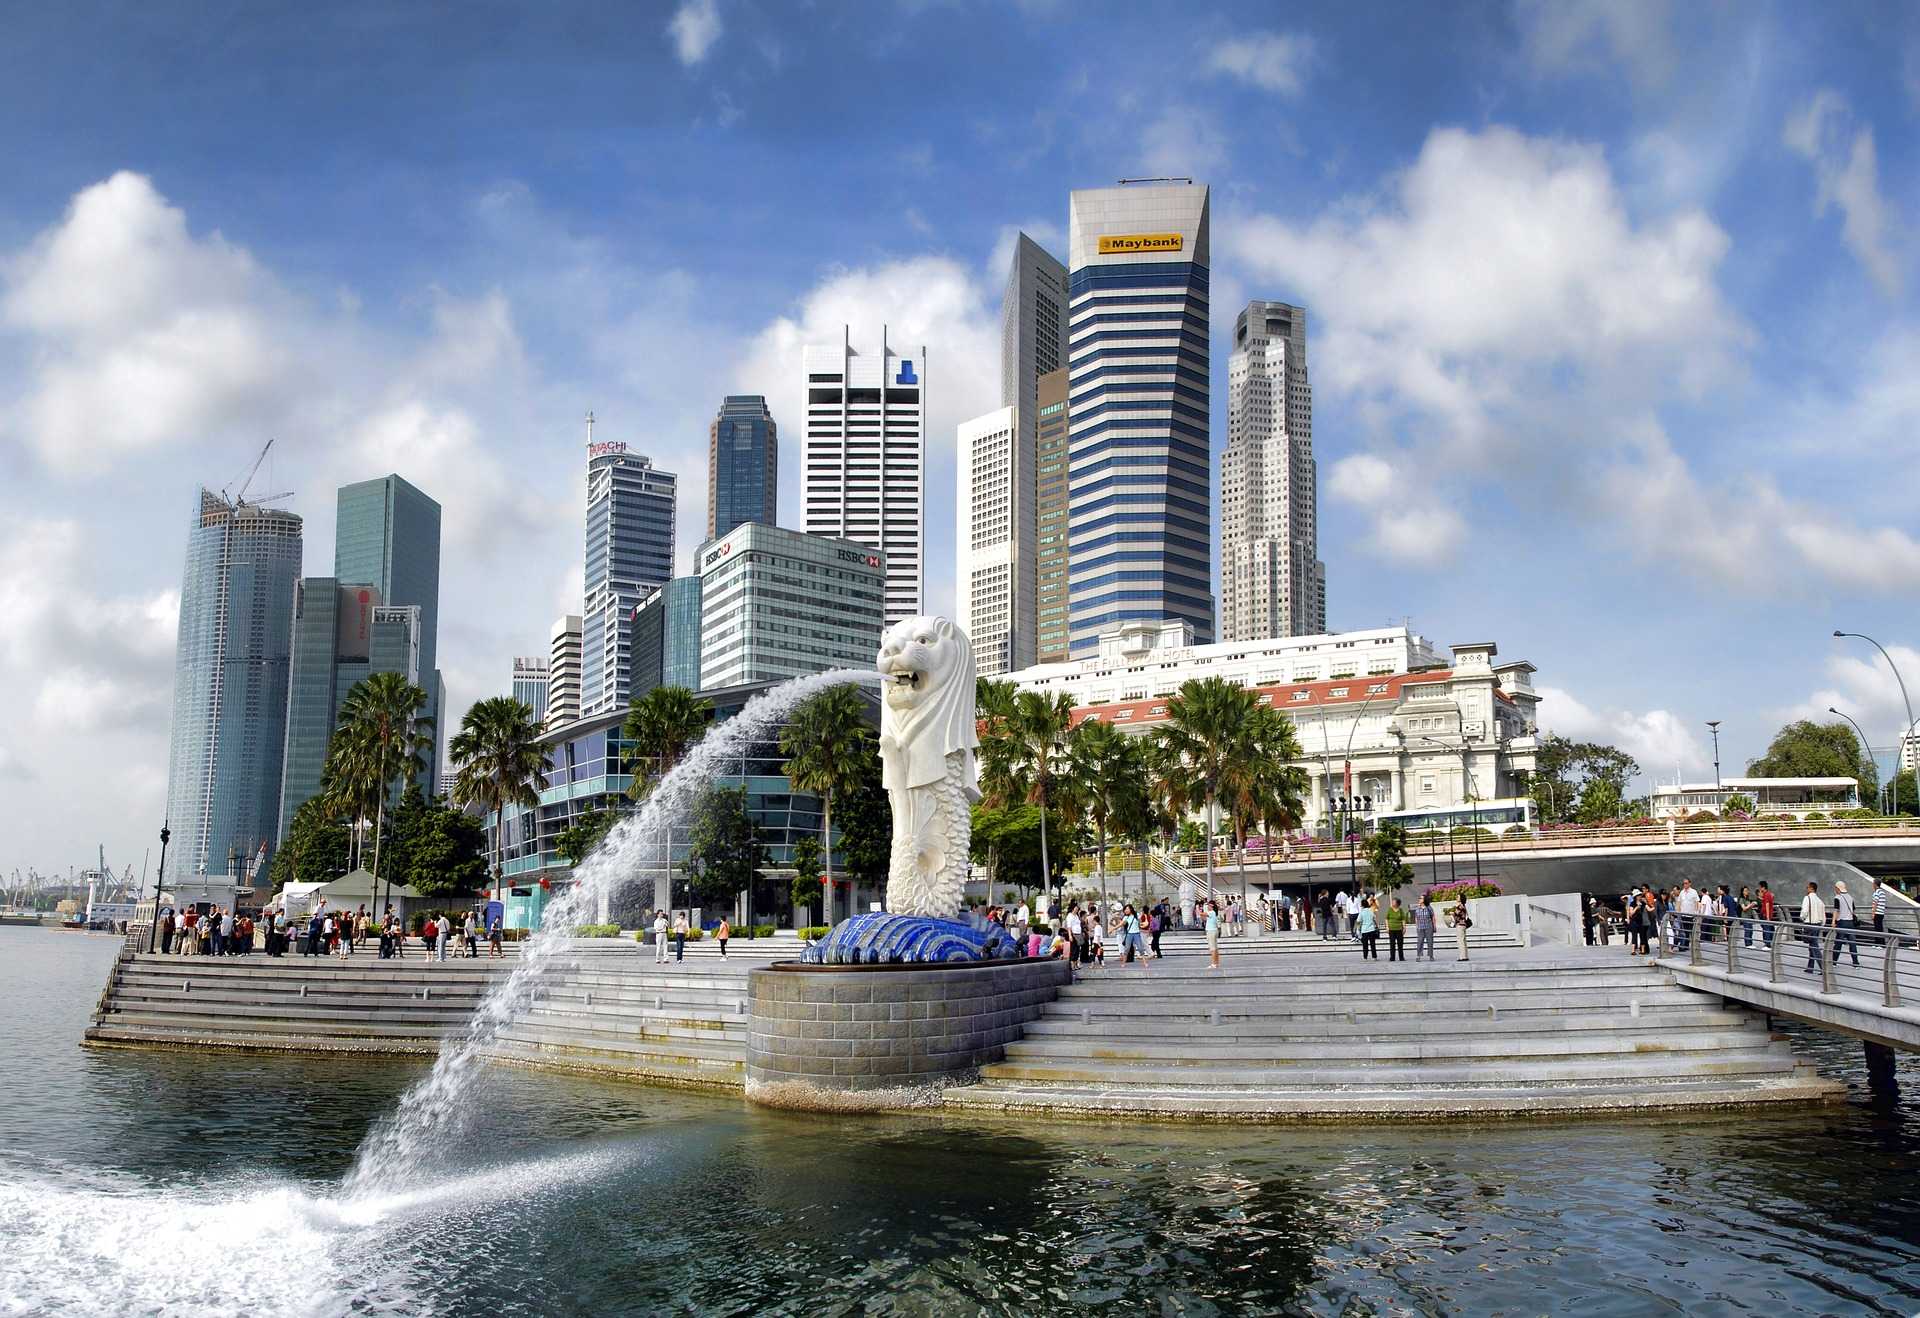 Singapore is an expensive country to travel in